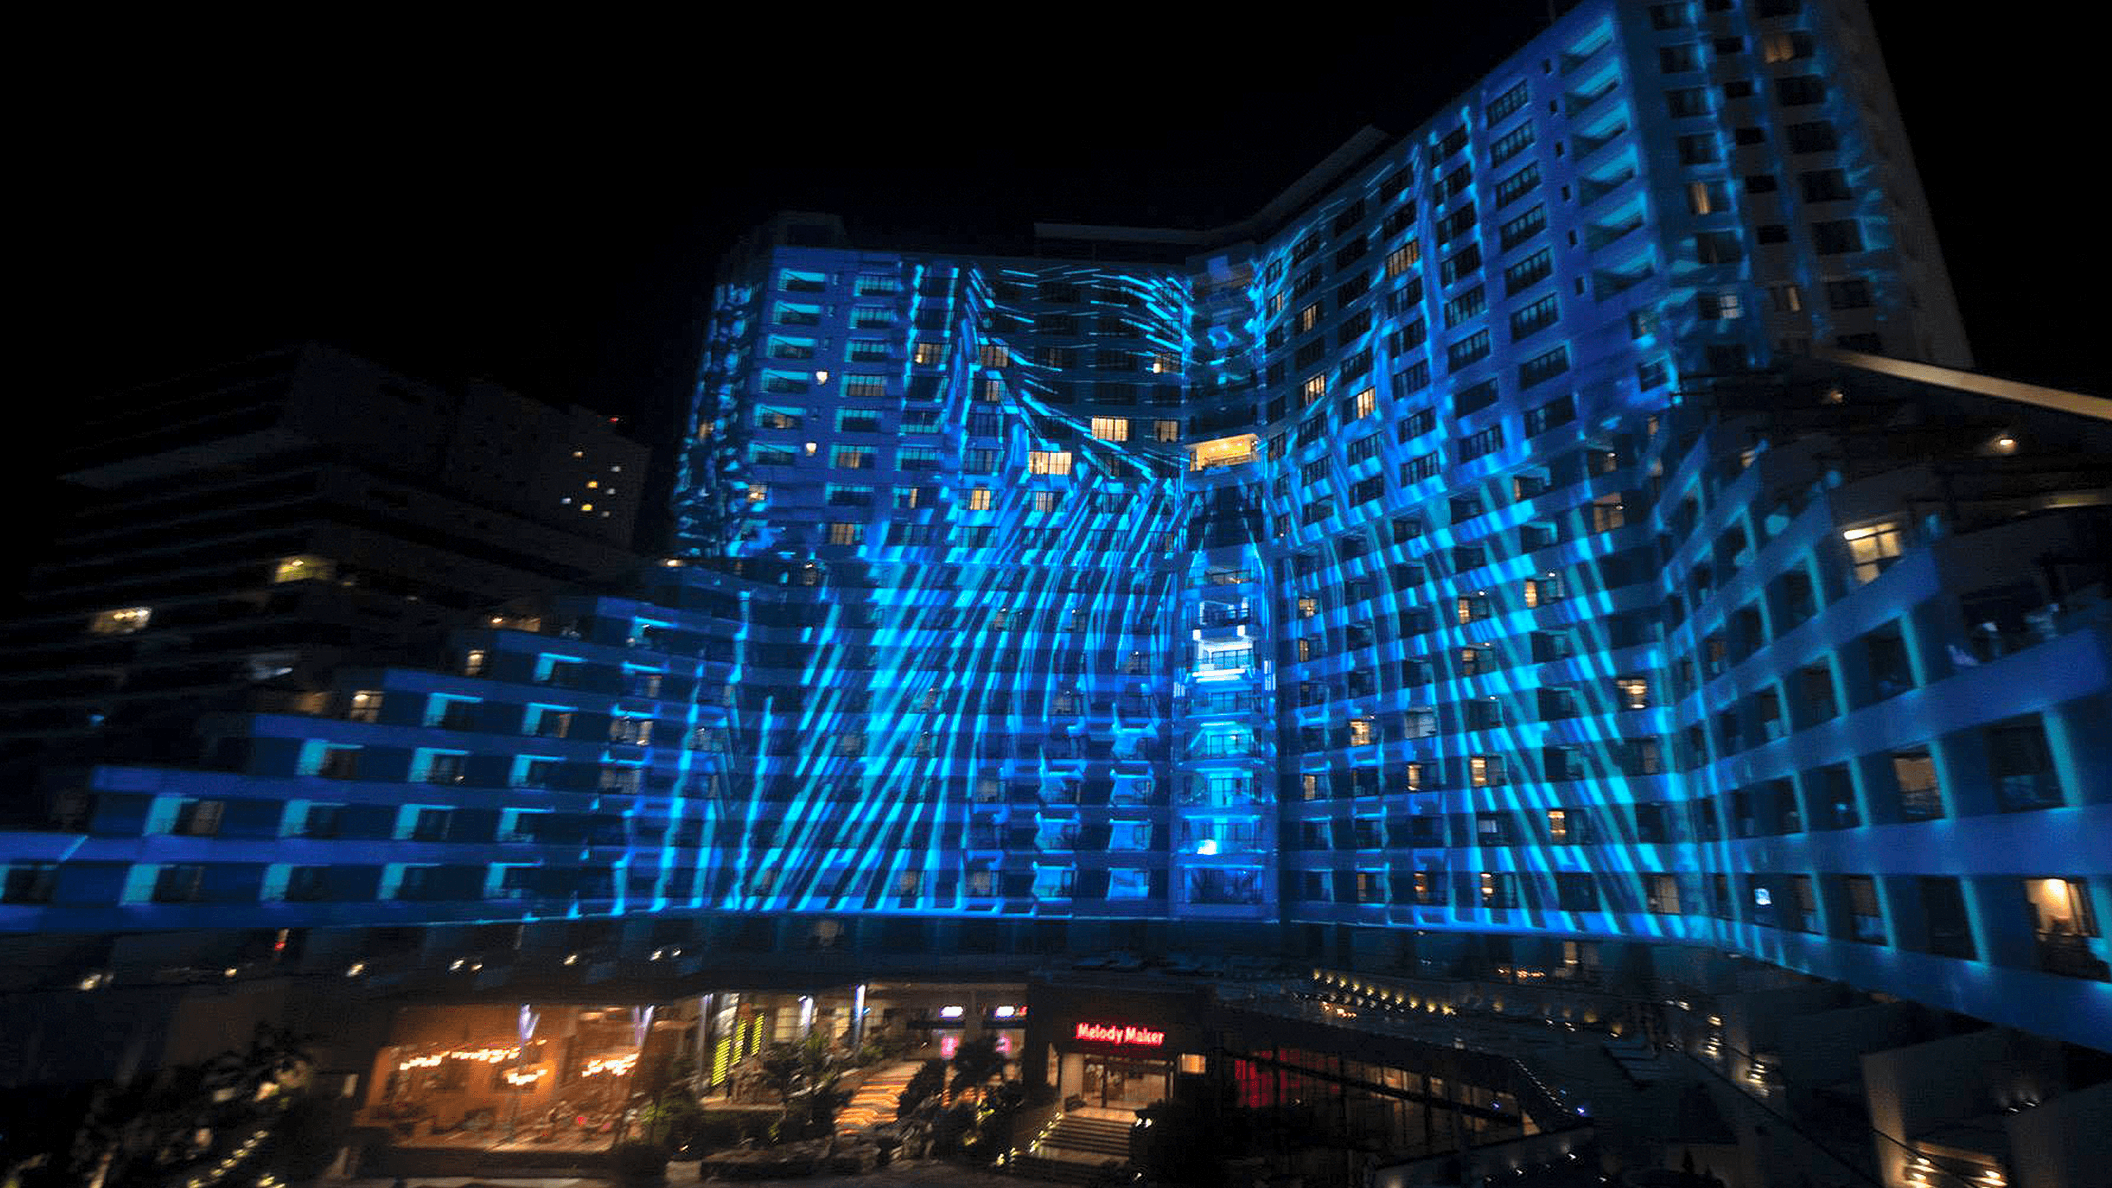 Giant permanent projection mapping show at the Melody Maker Hotel in Cancun run by Screenberry media server